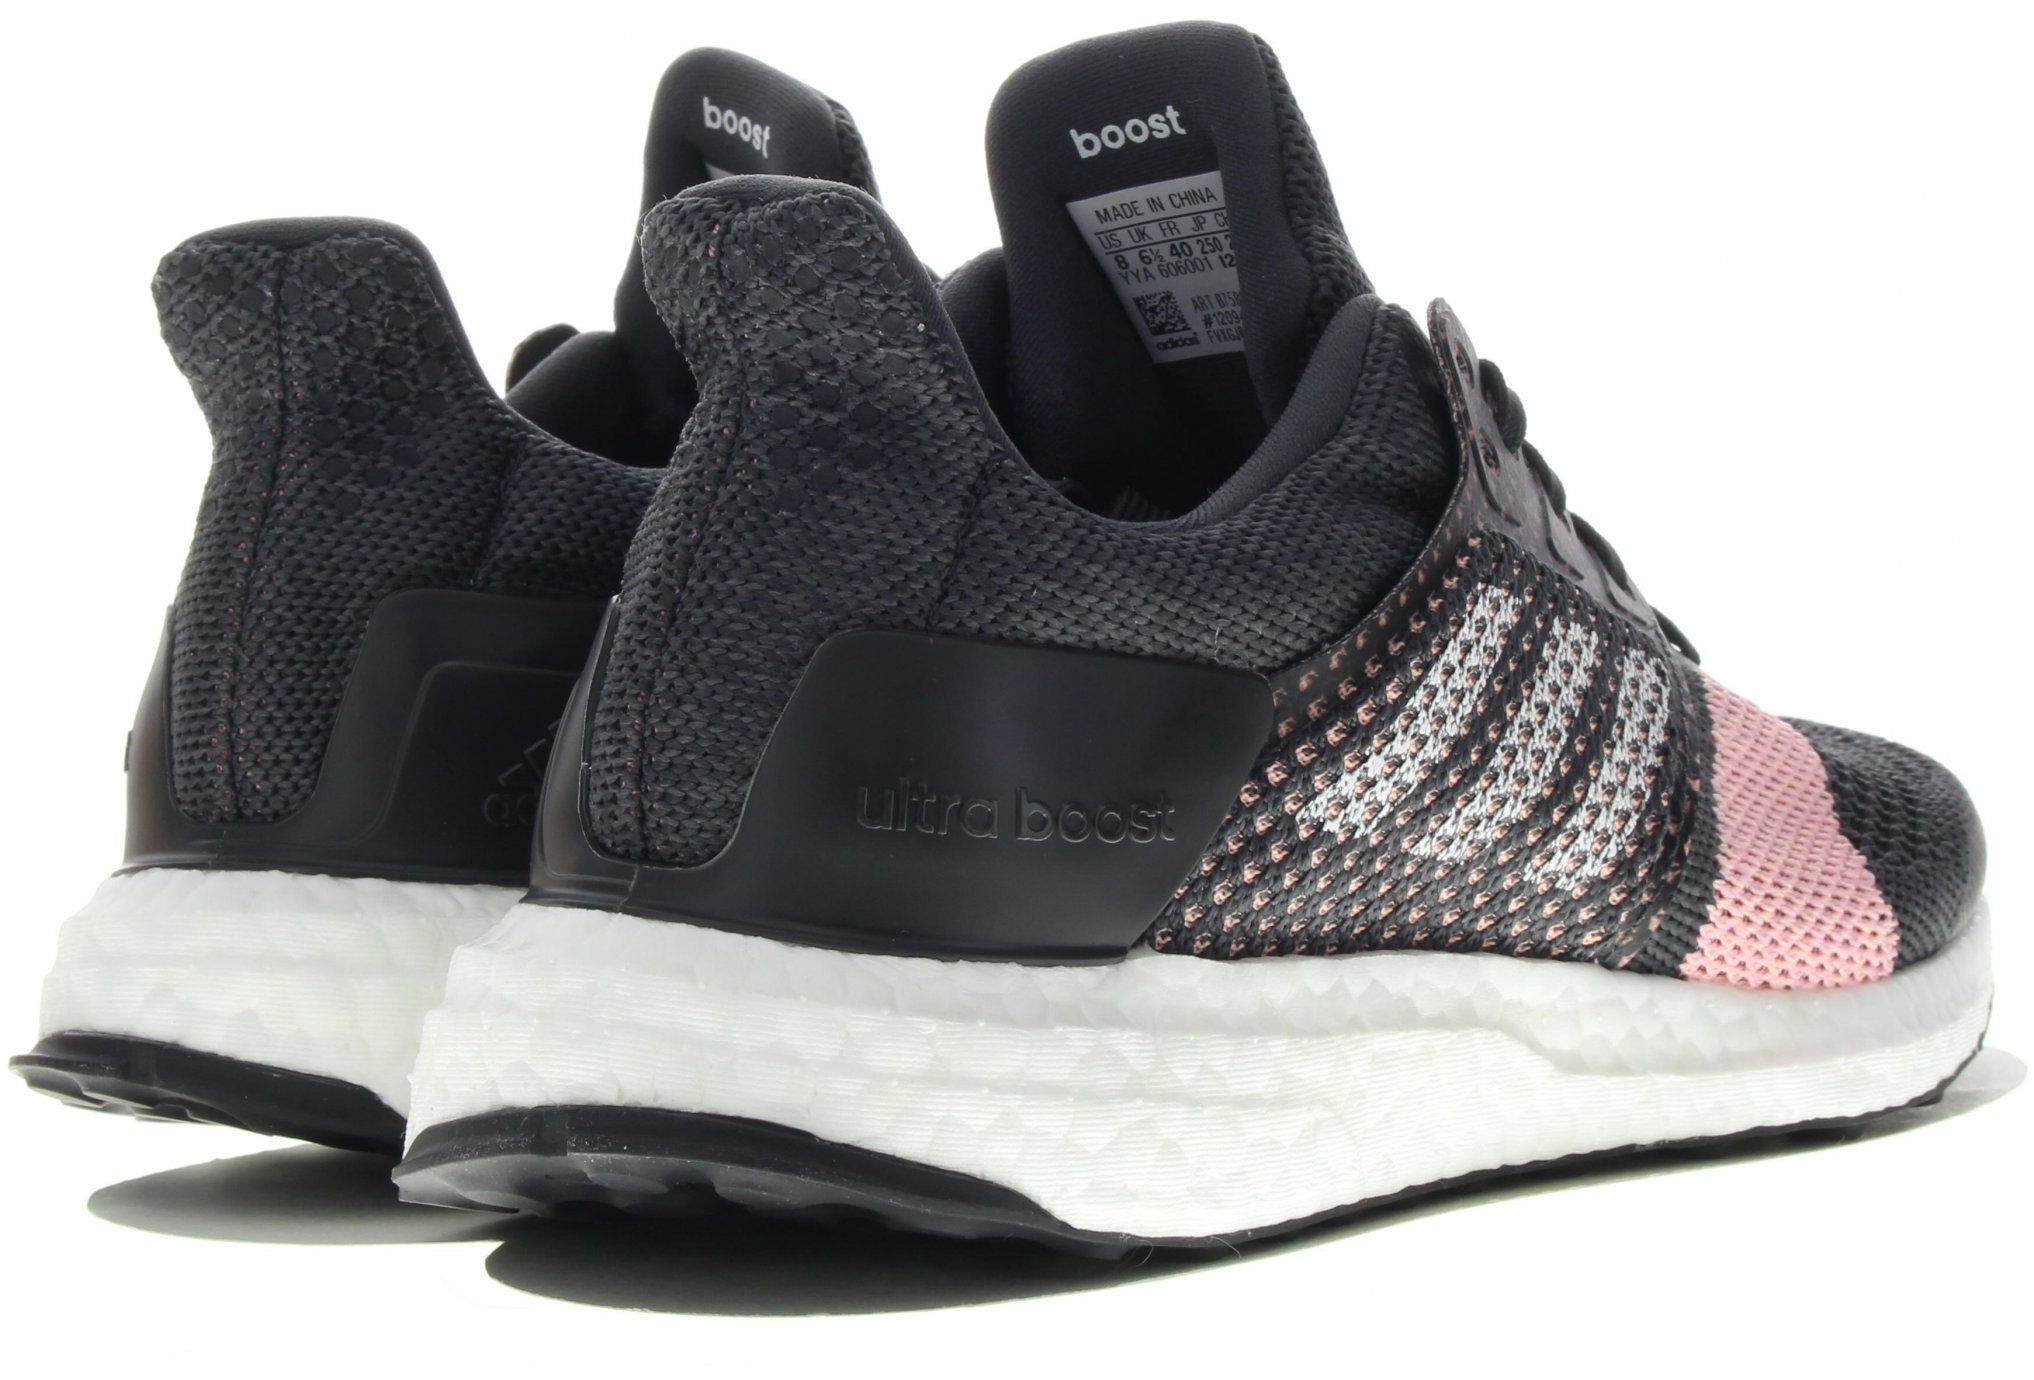 Adidas Ultraboost W Femme Grisargent Pas Cher 6933